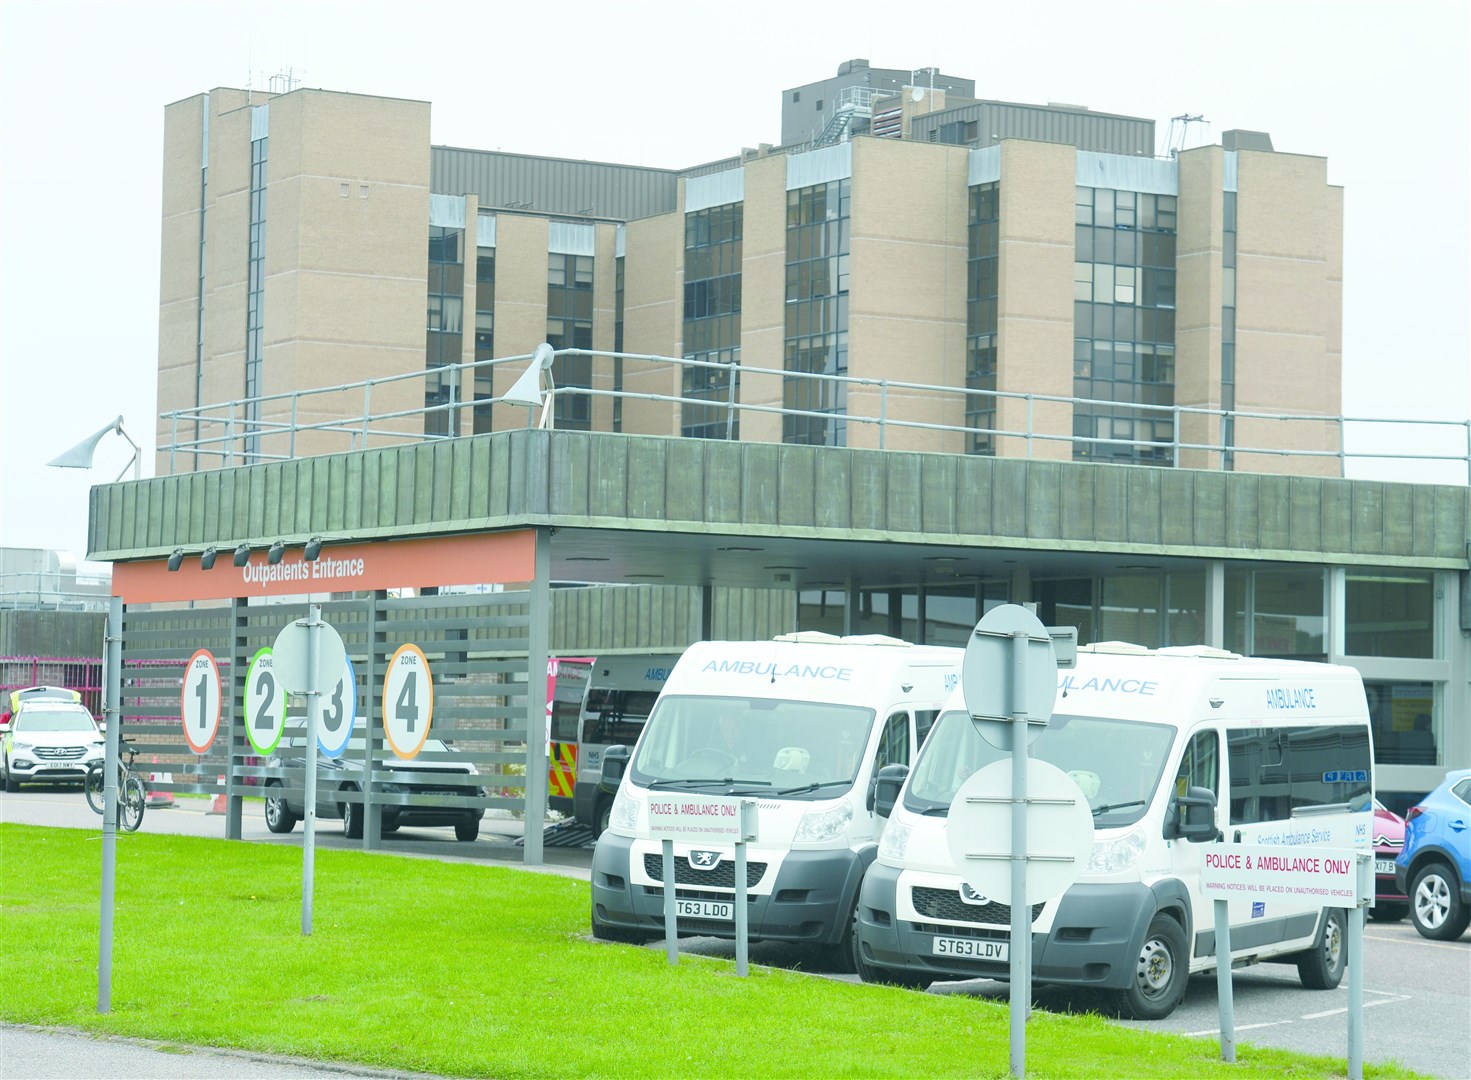 Ward 3A at Raigmore Hospital is closed due to a scabies outbreak.